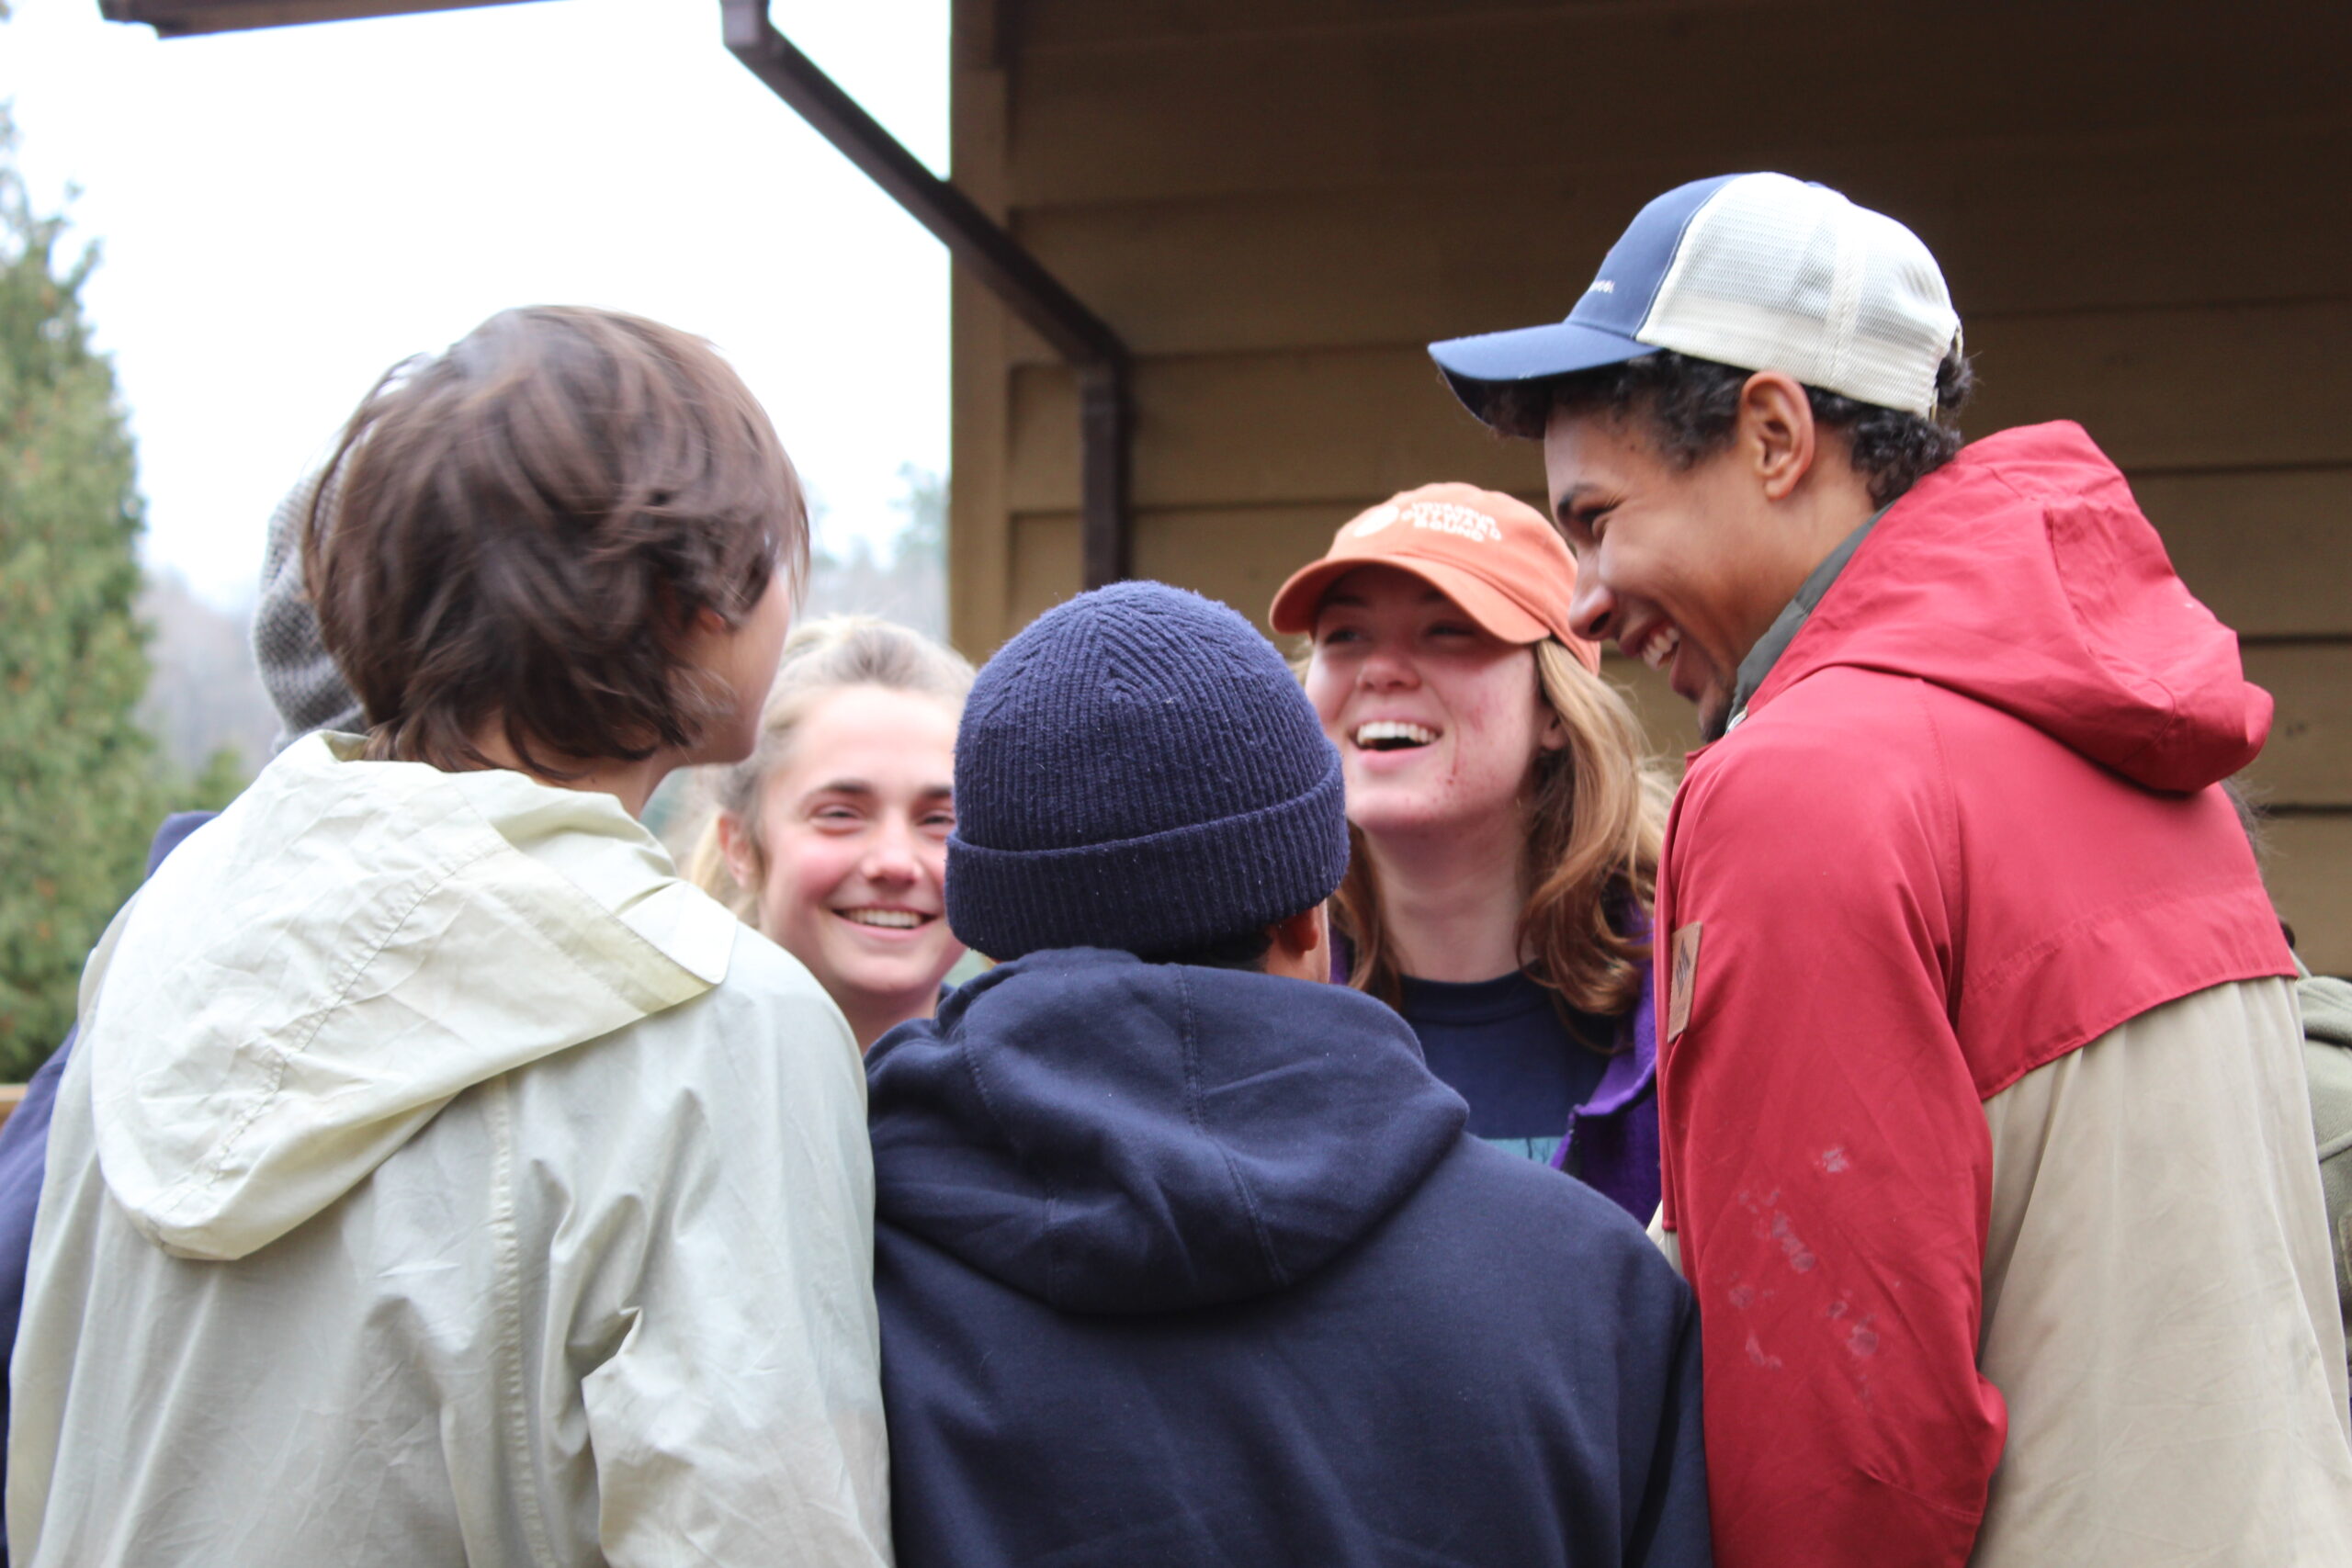 Intercept students bond while on course with Outward Bound